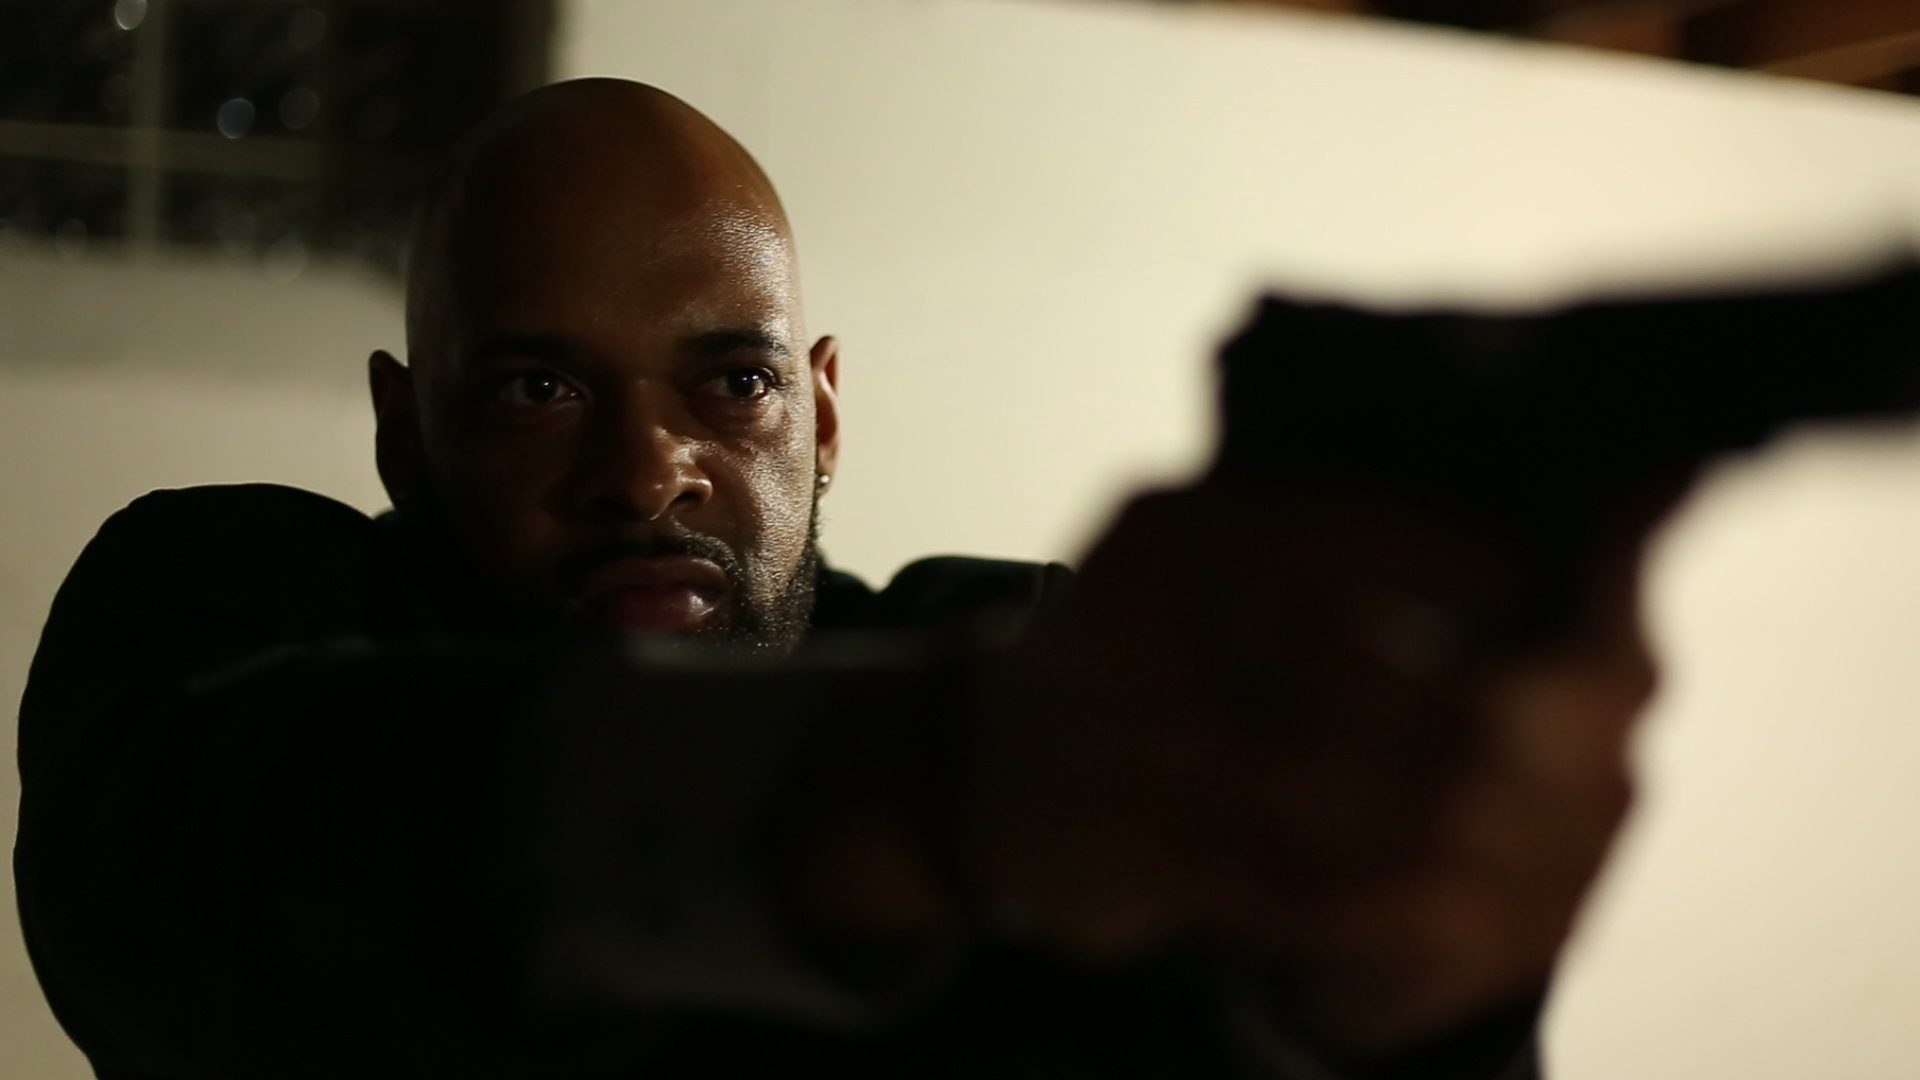 Detective Quincy Smith, played by actor Shane Carson in the film, Foxx and Hound. Filmed in October of 2013.